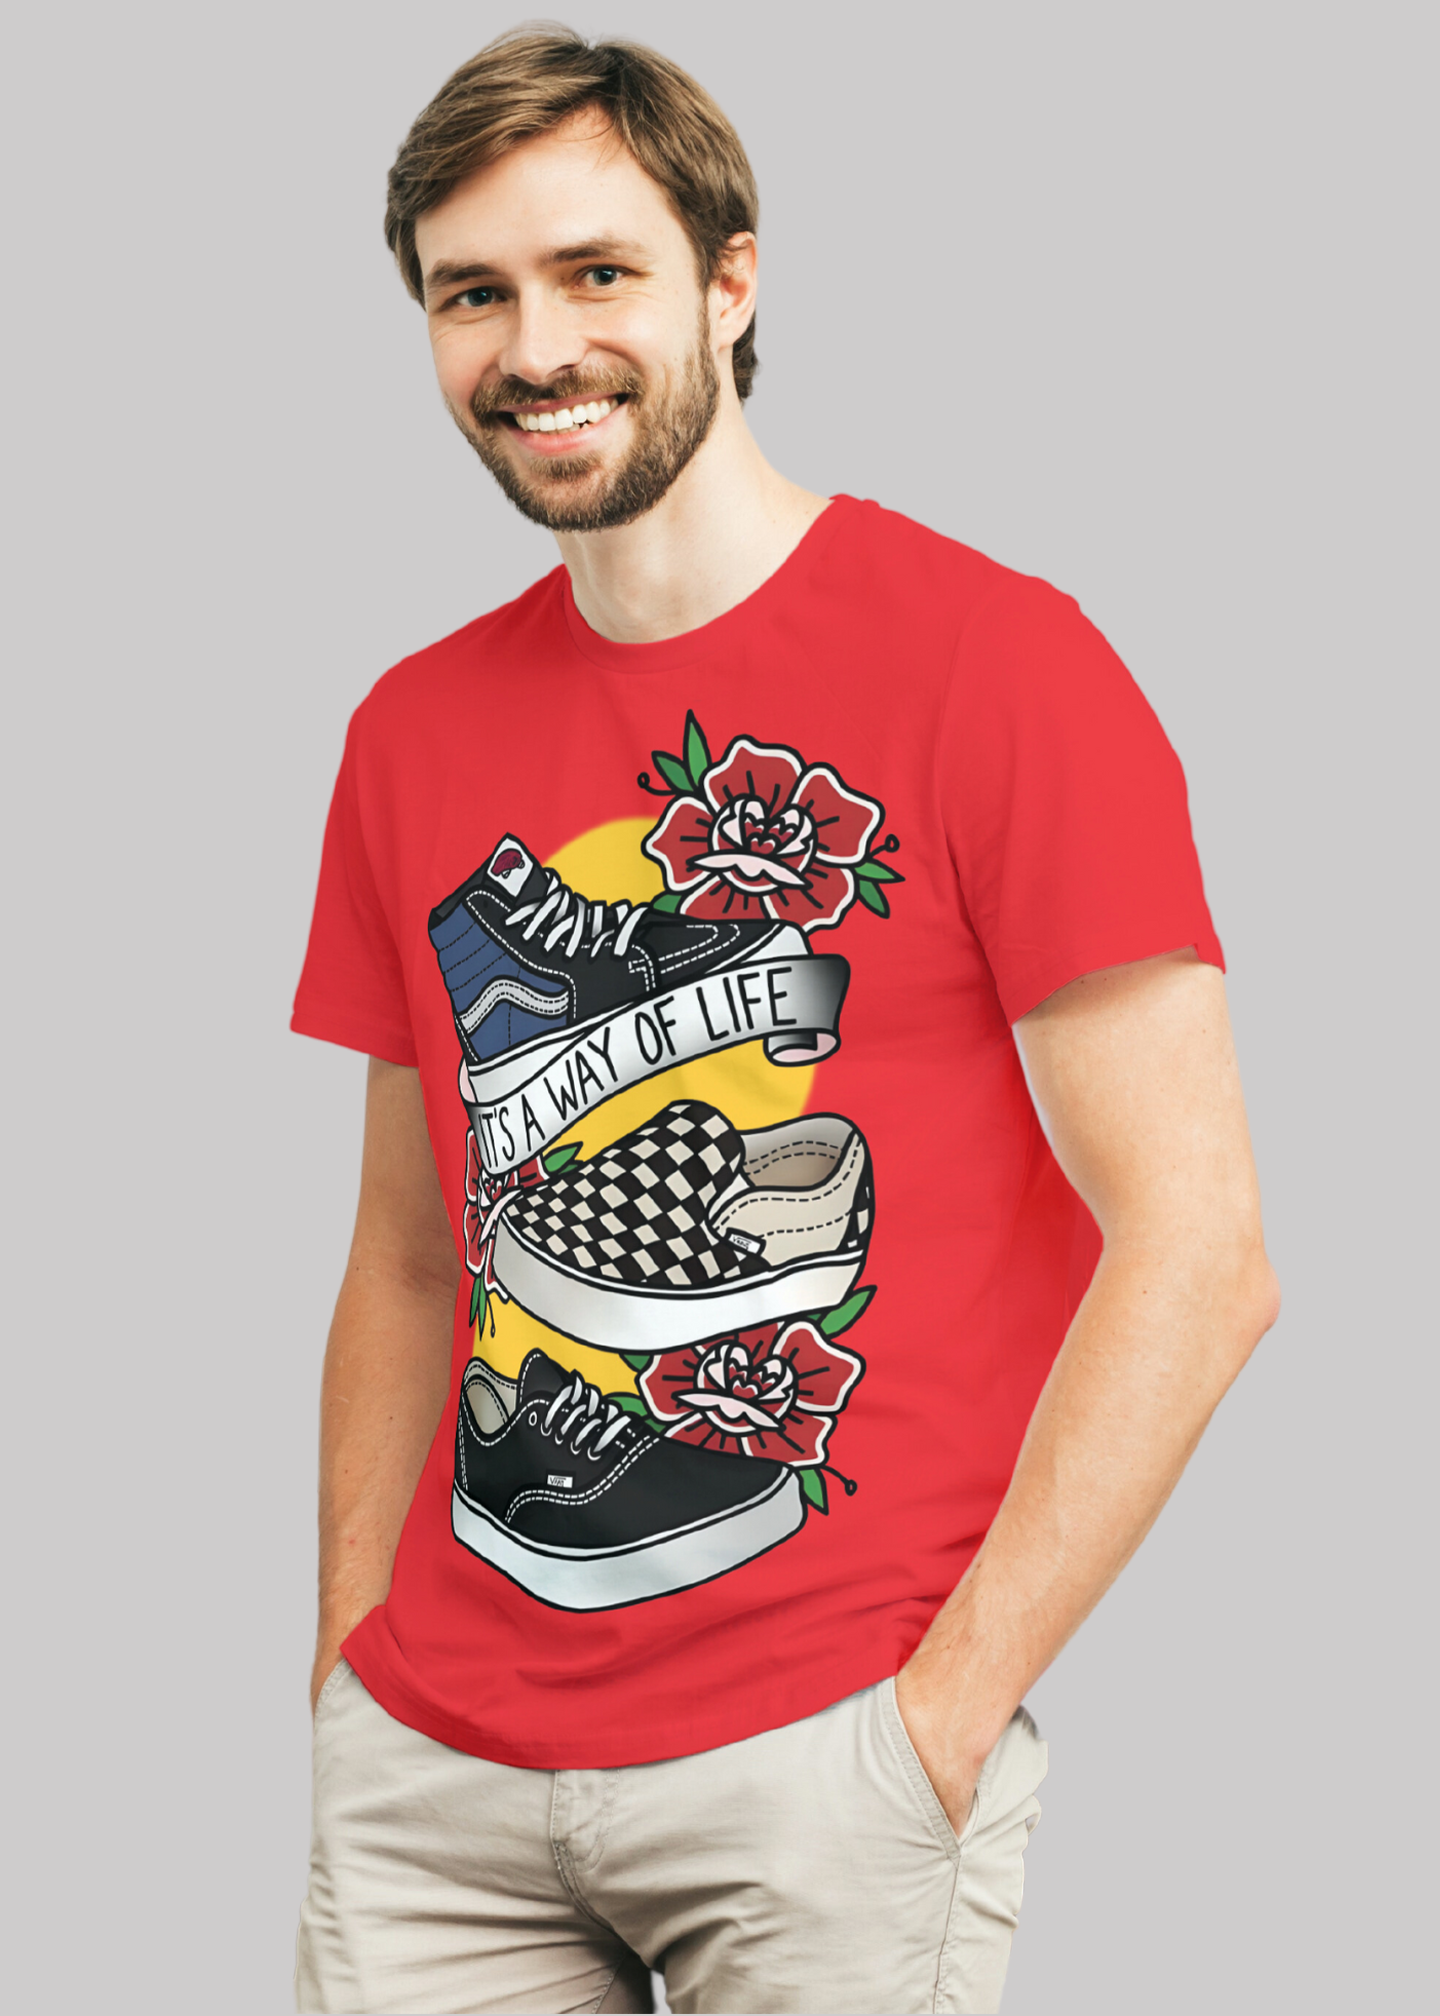 Its way of life Printed Half Sleeve Premium Cotton T-shirt For Men